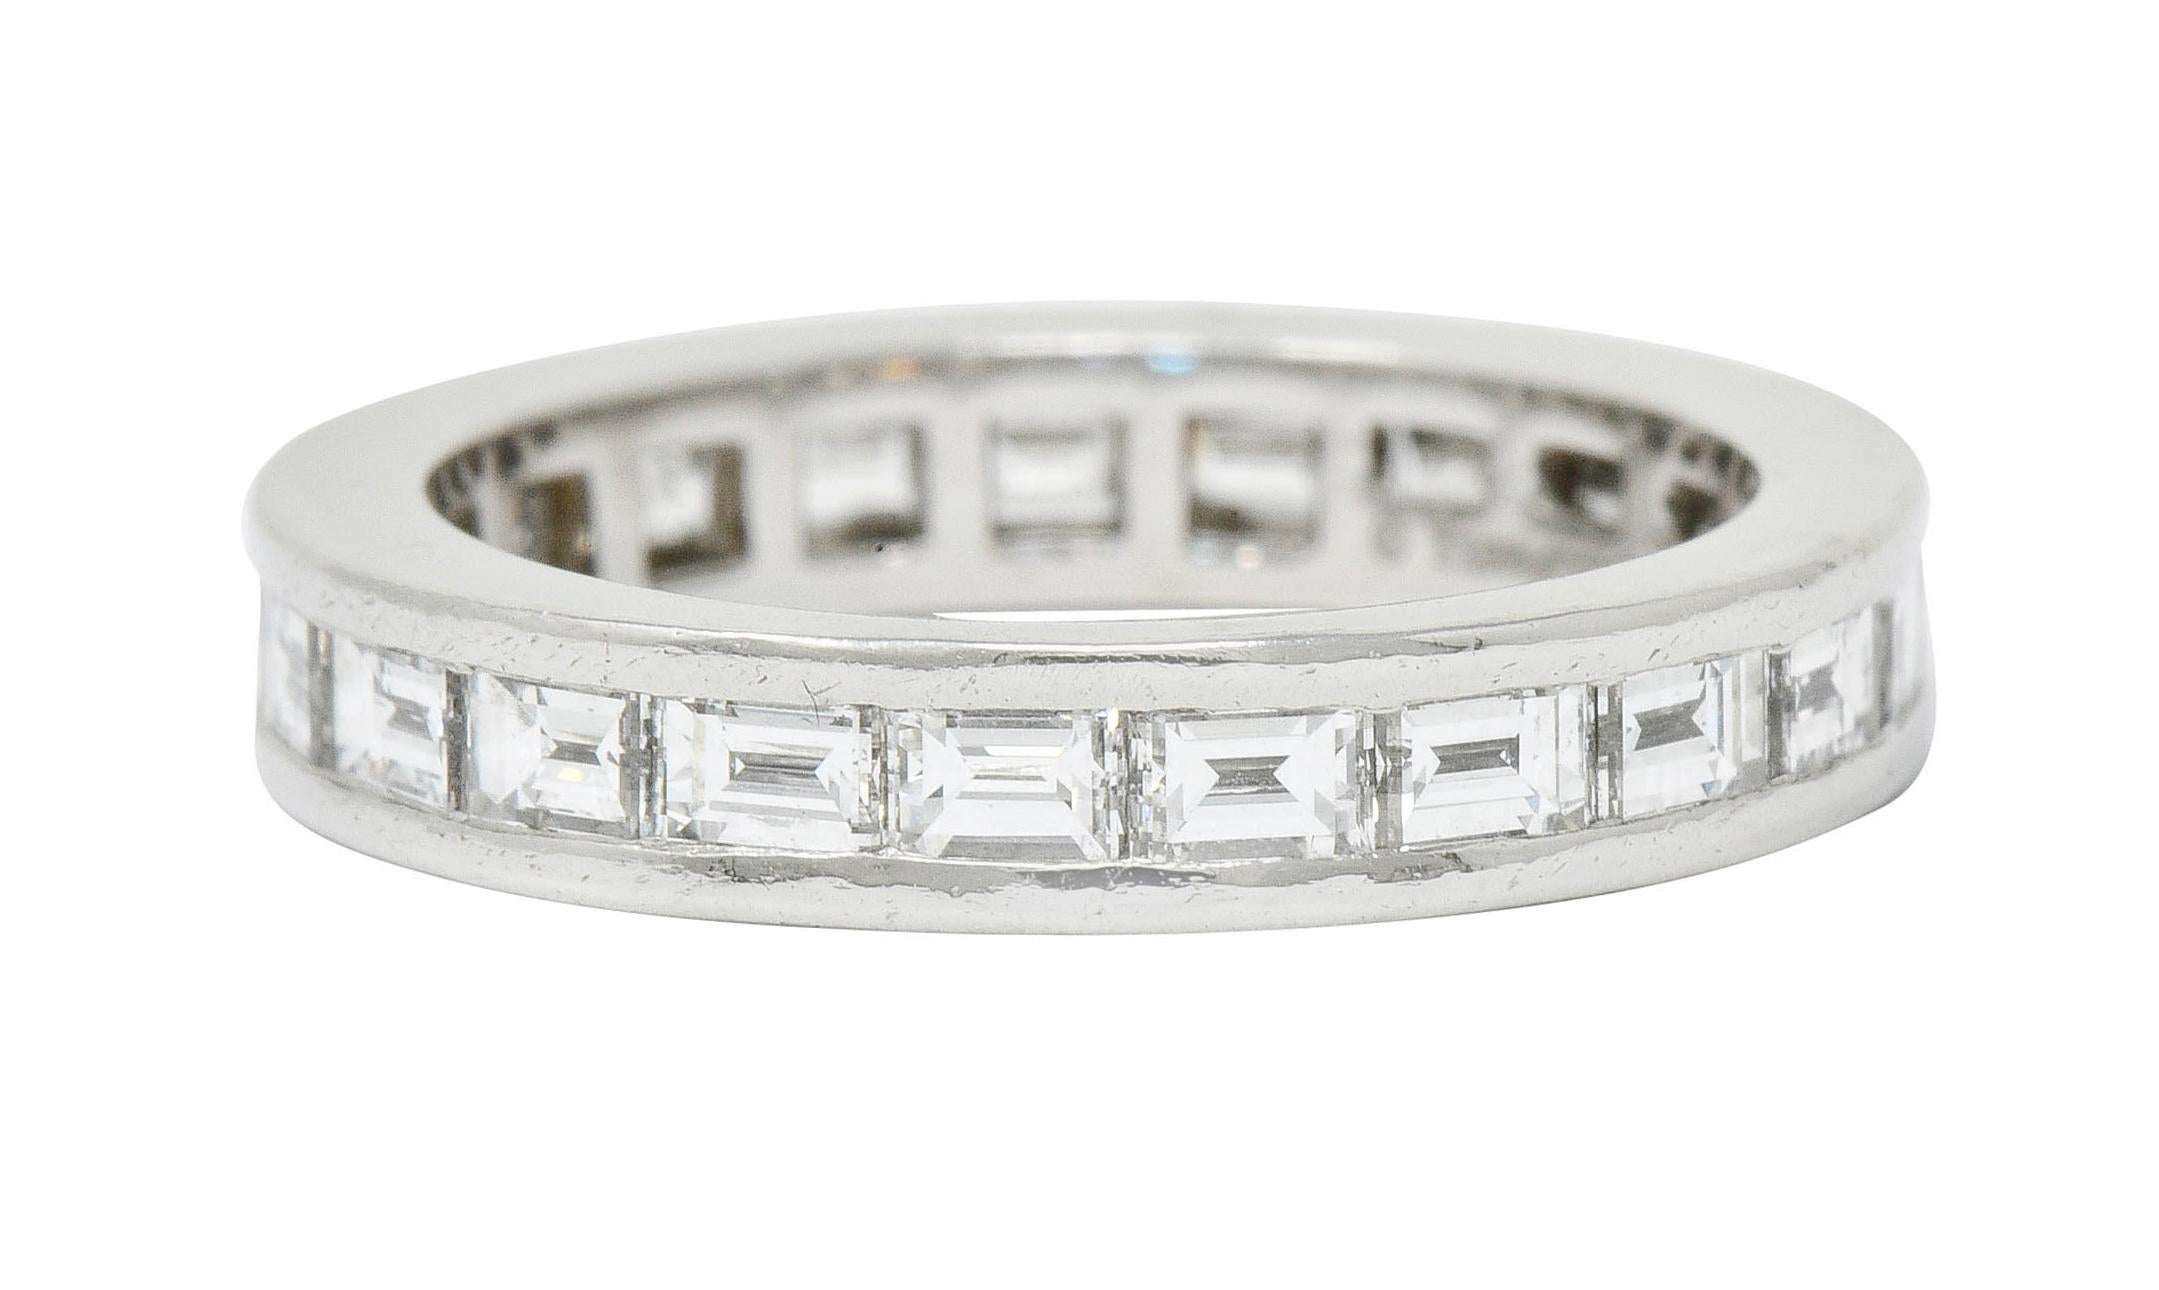 Eternity style band ring channel set fully around by twenty-one baguette cut diamonds

Weighing in total 1.68 carats, E/F color with VVS to VS clarity

Signed Tiffany & Co.

Tested as platinum

Ring Size: 5 & not sizable

Measures: 3.5 mm wide and